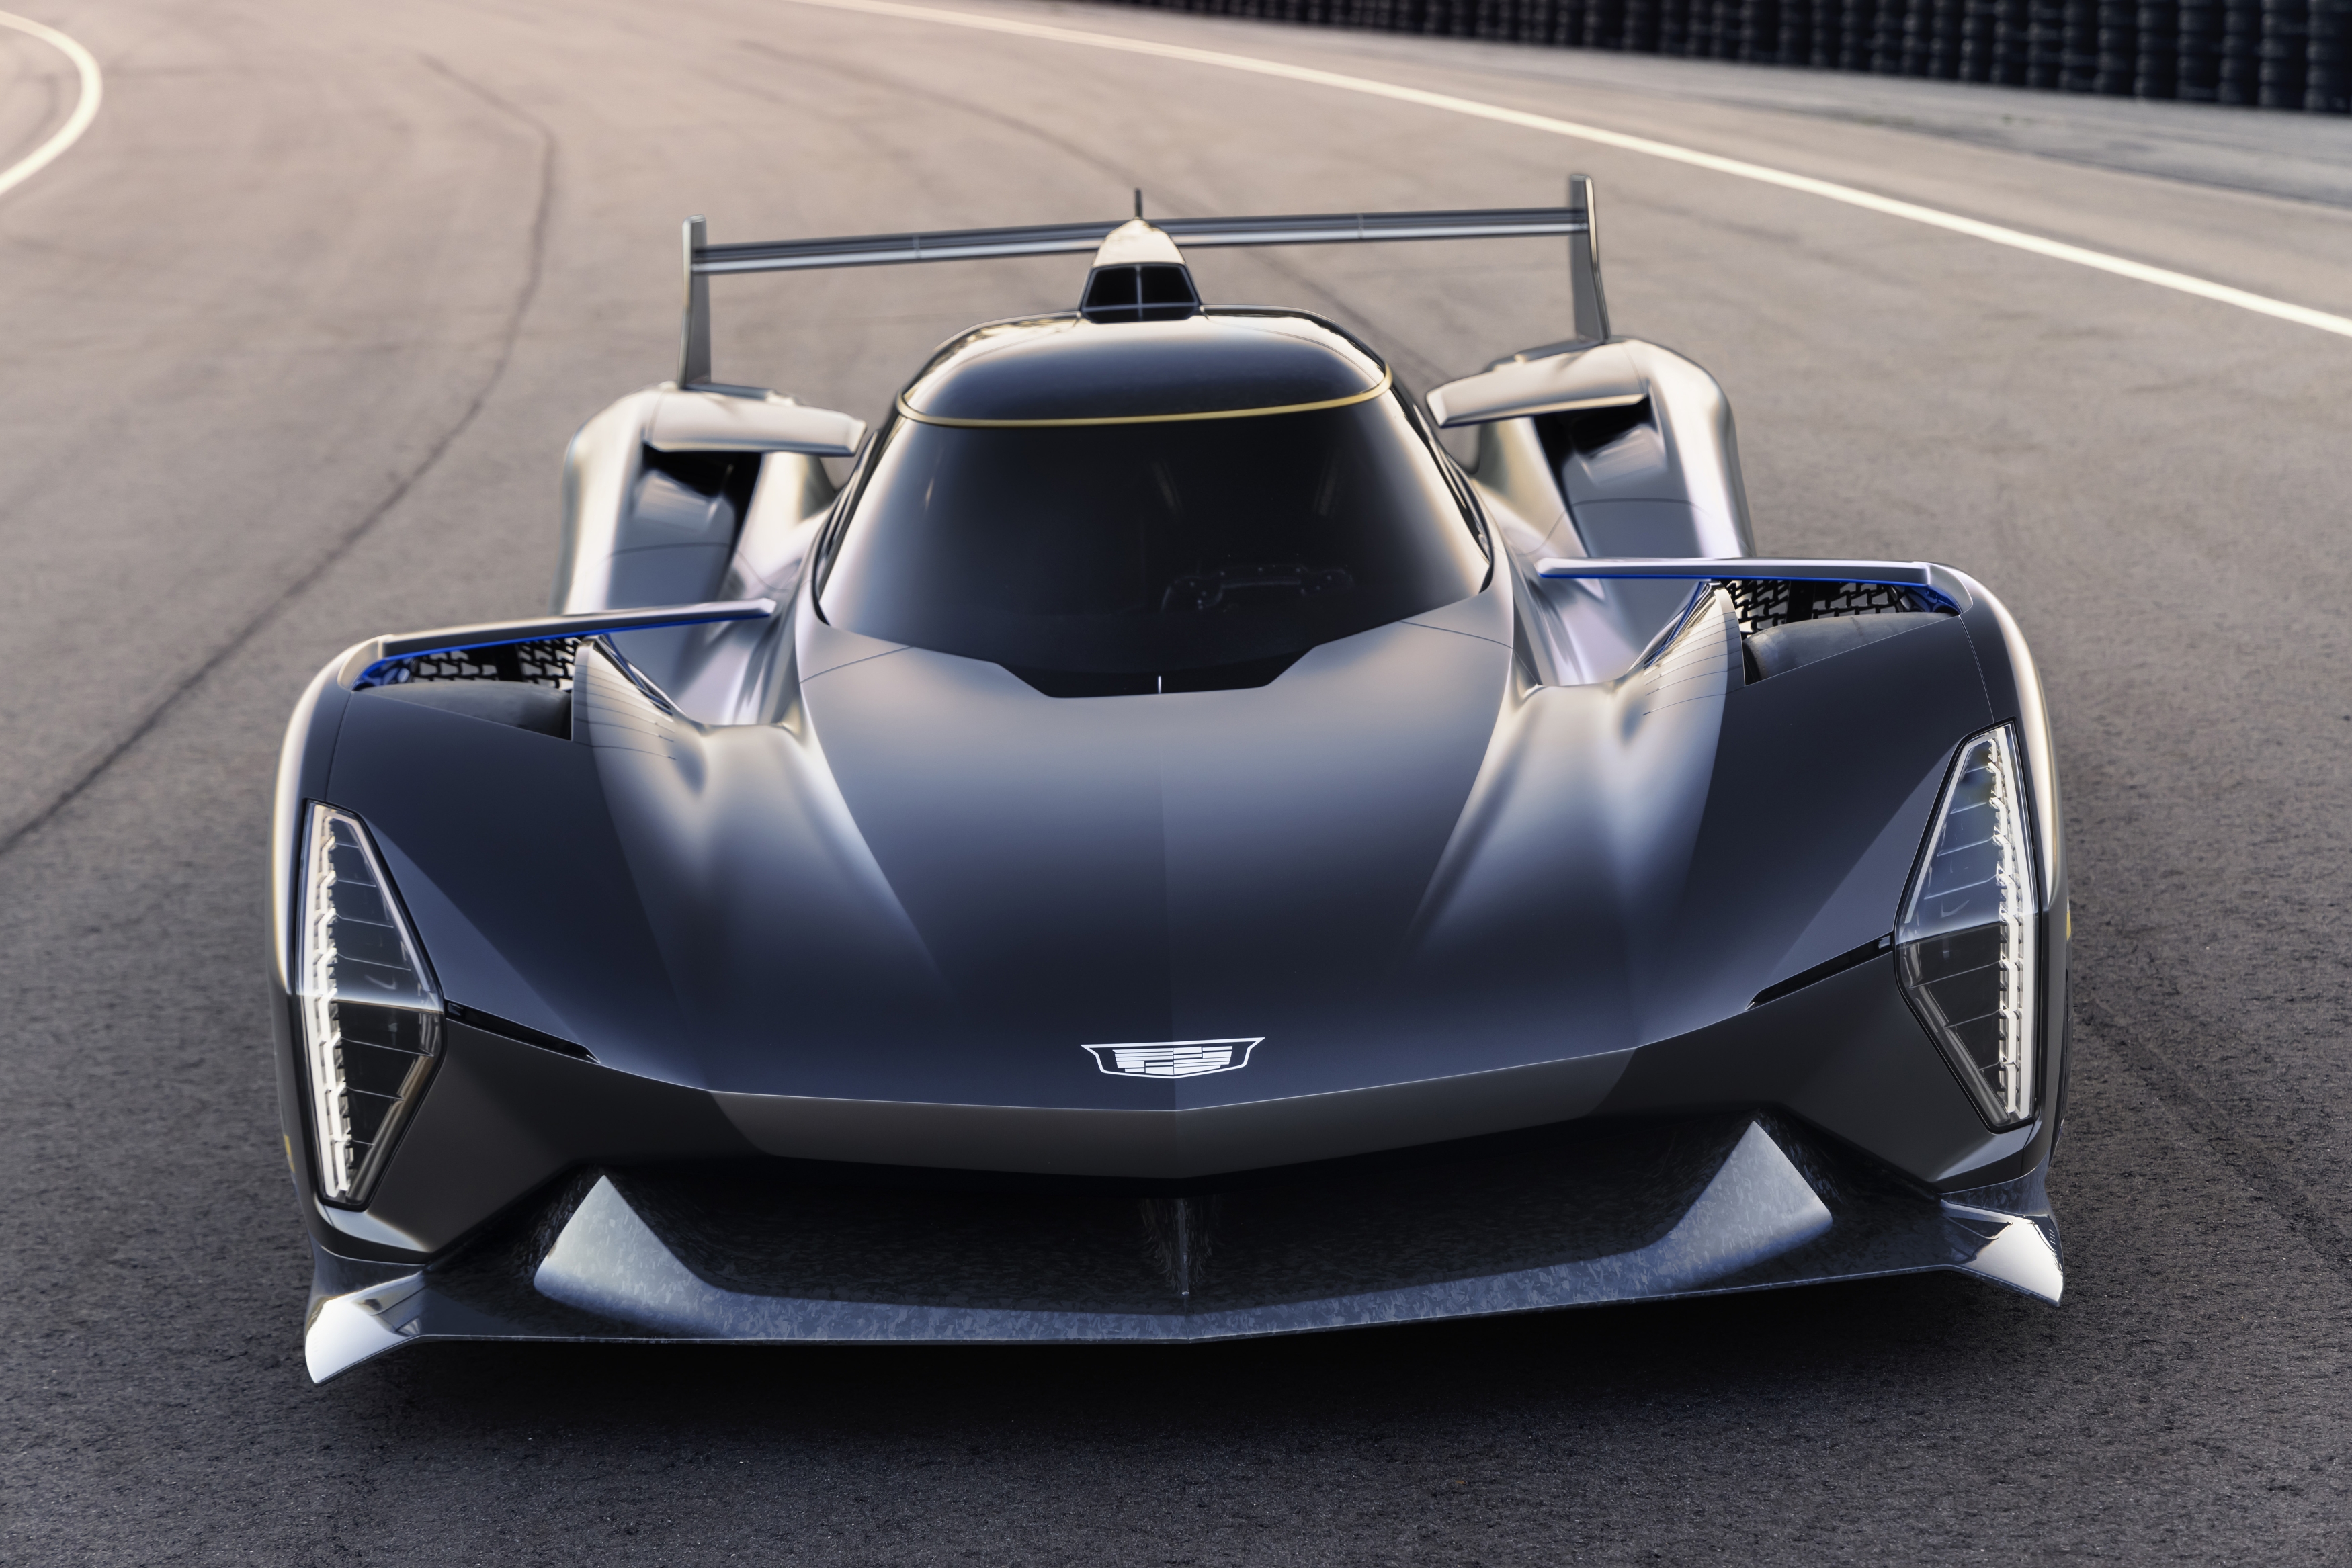 Cadillac’s Project GTP Hypercar is Gunning for Le Mans